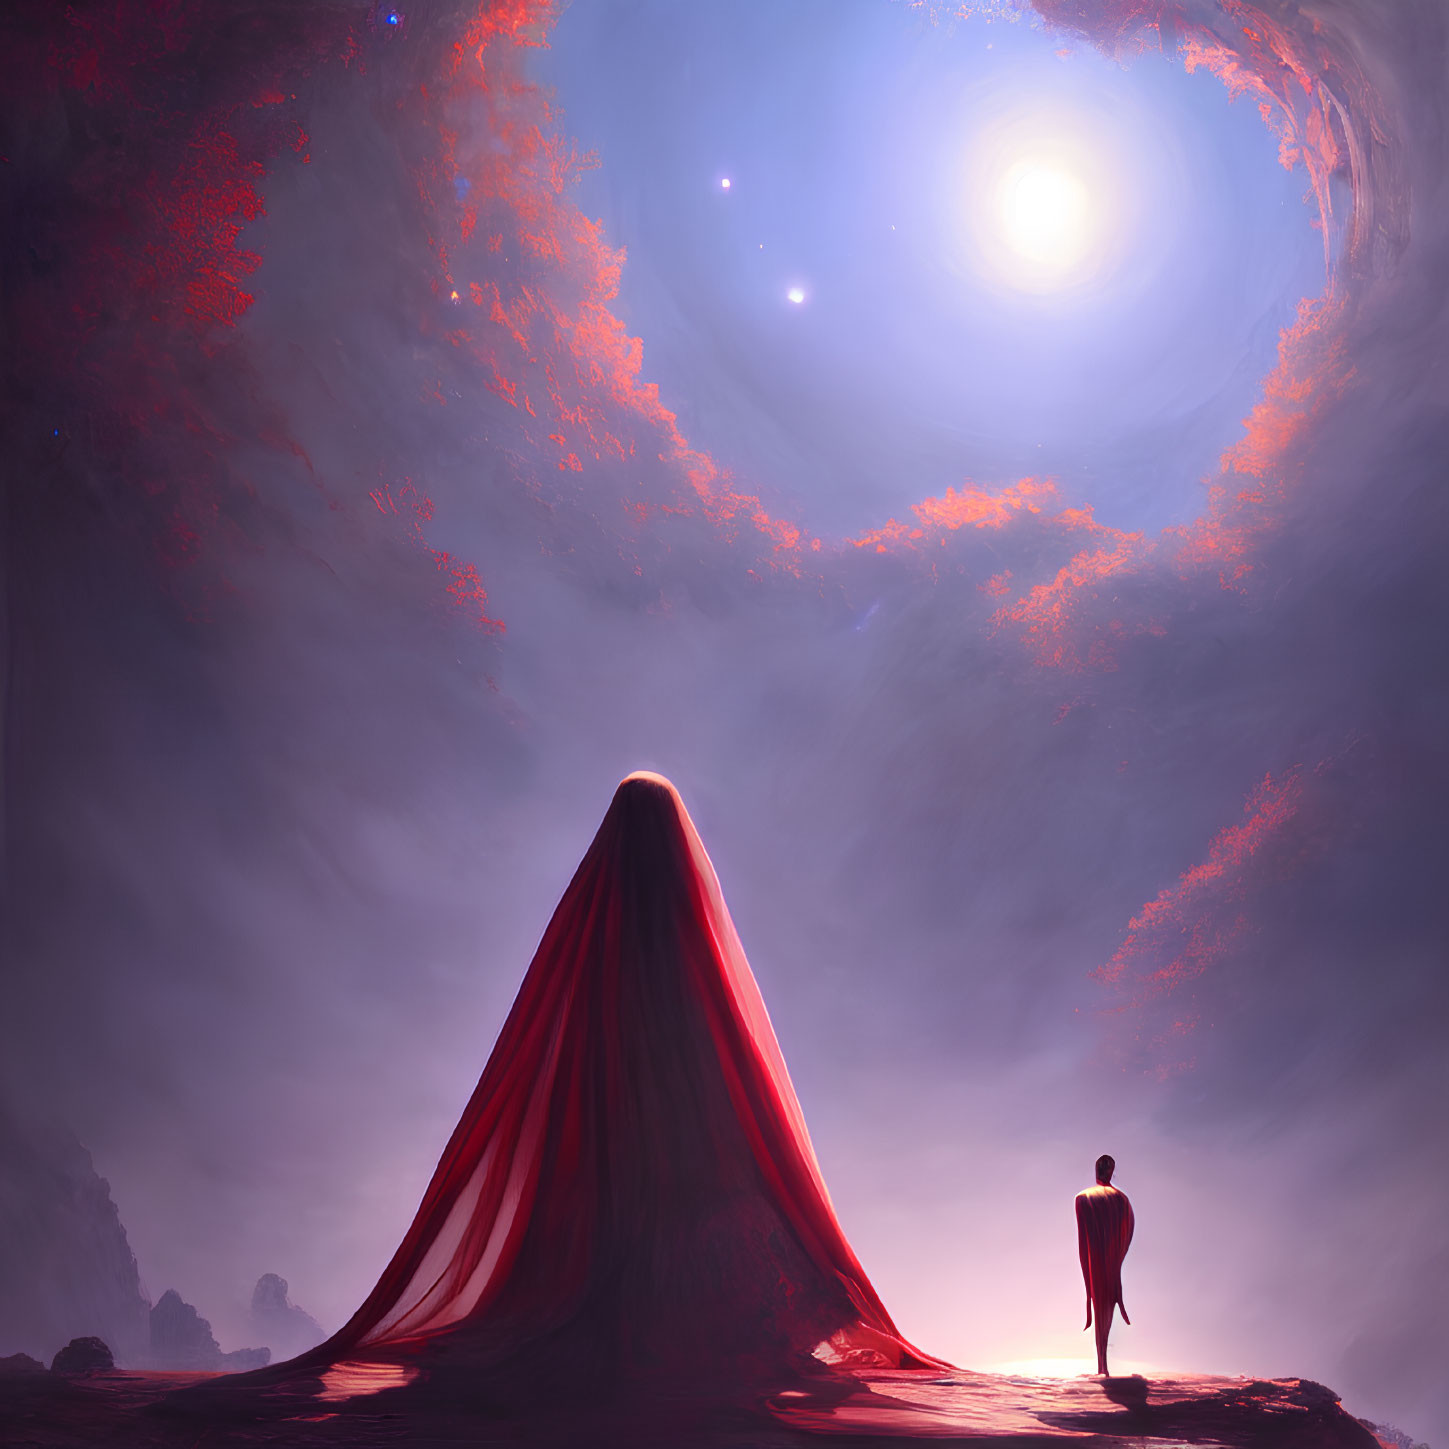 Solitary figure before majestic red mountain under swirling purple sky